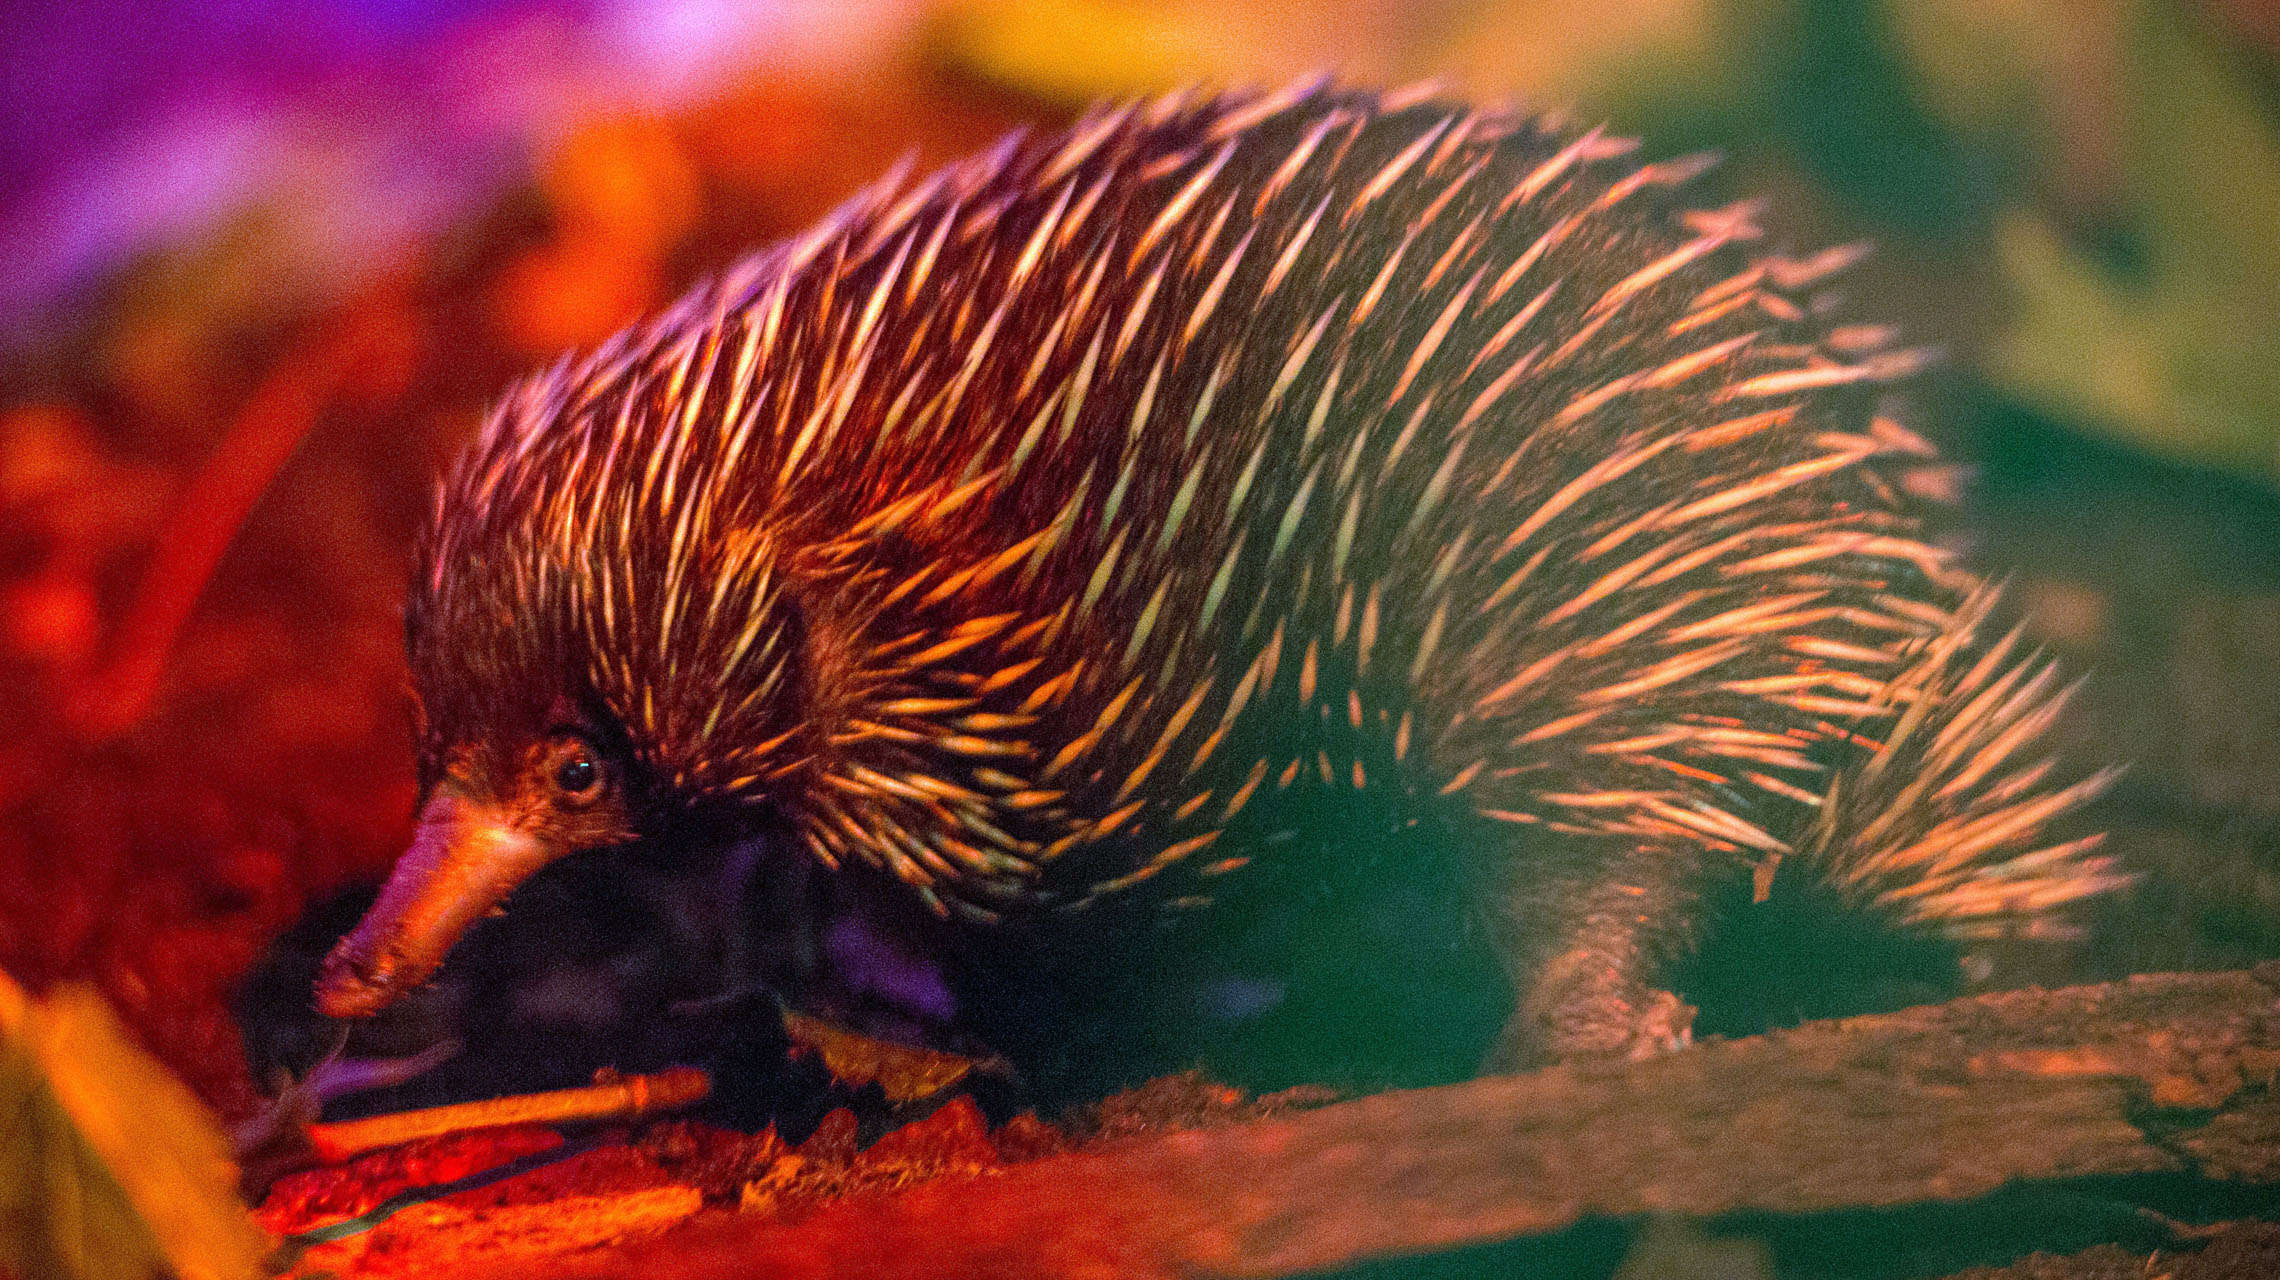 Four-headed echidna, Mating biology, Monotreme anatomy, Syfy Wire article, 2280x1280 HD Desktop